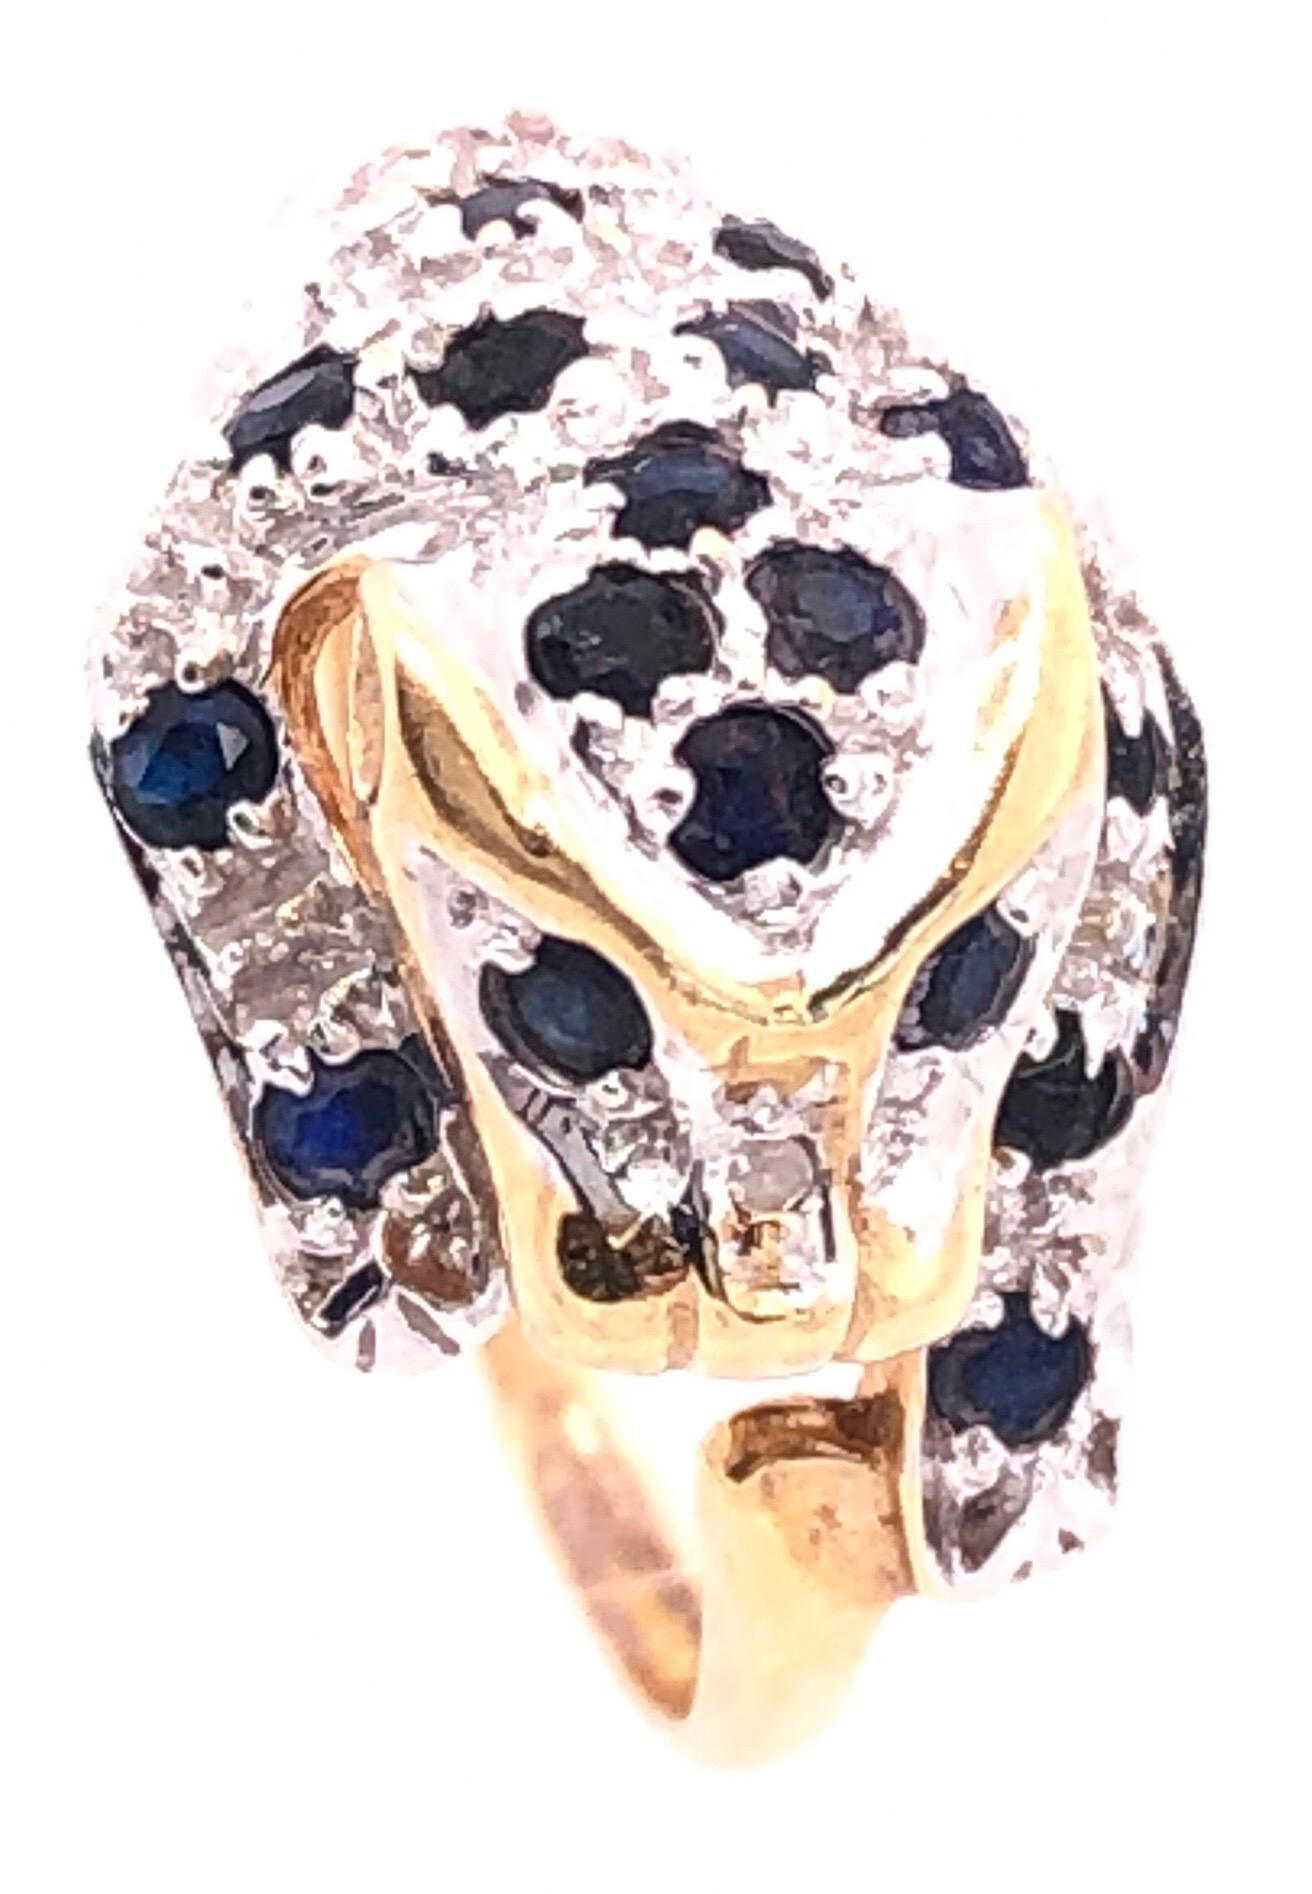 14 Karat Yellow Gold Diamond and Sapphire Panther Ring
0.01 total diamond weight
17 round sapphires
Size 6.5
2 grams total weight.
